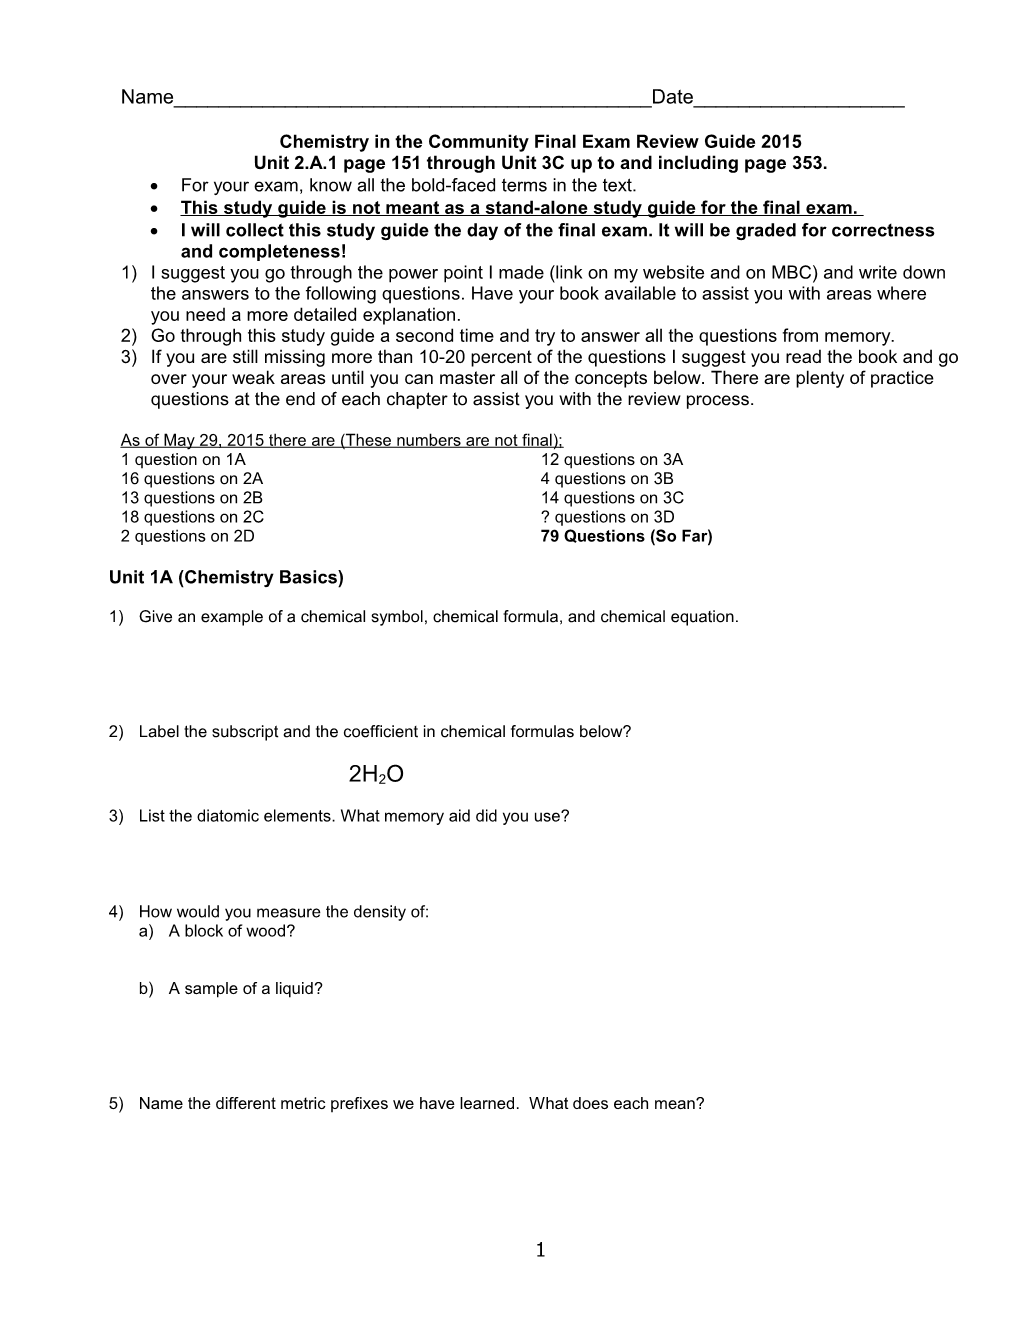 Chemistry in the Community Final Exam Review Guide 2015